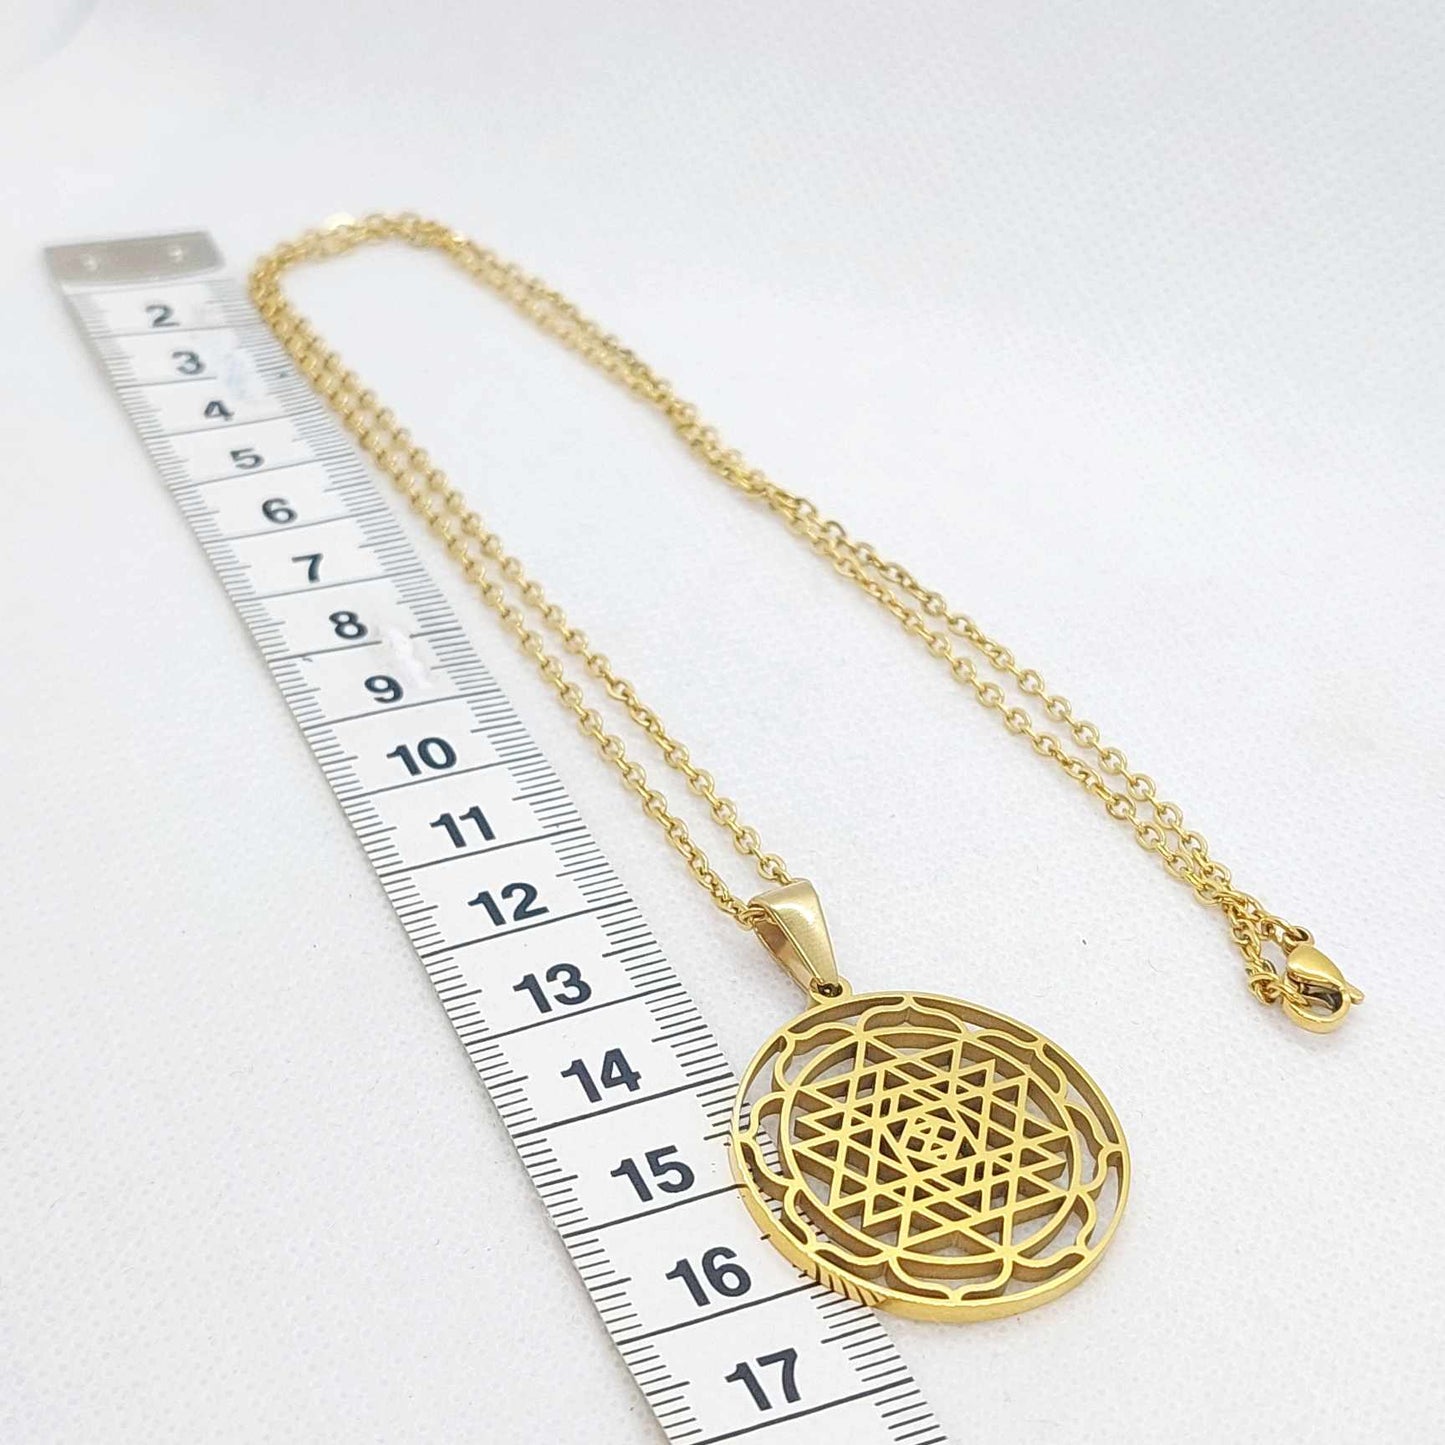 Shri Chakra Yantra Pendant with Stainless Steel Chain Necklace